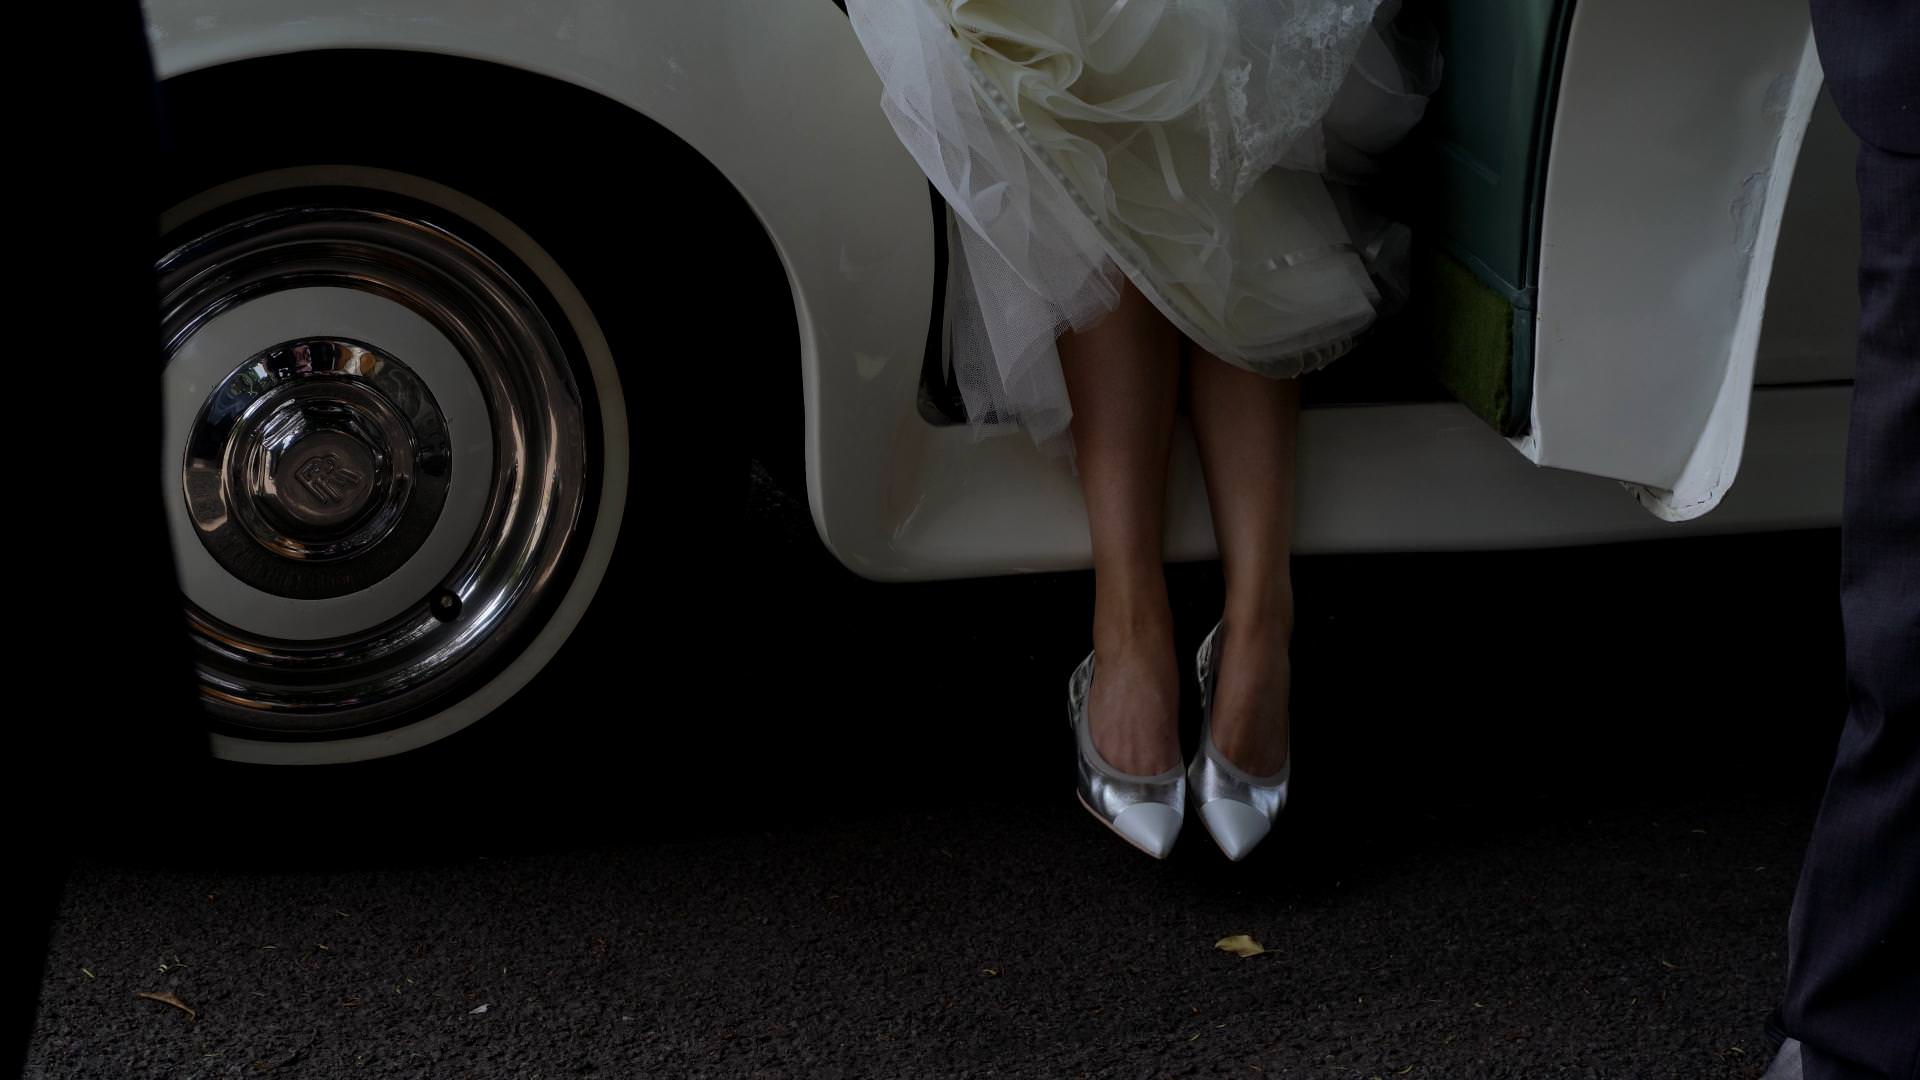 brides shoes gracefully exit wedding car outside church